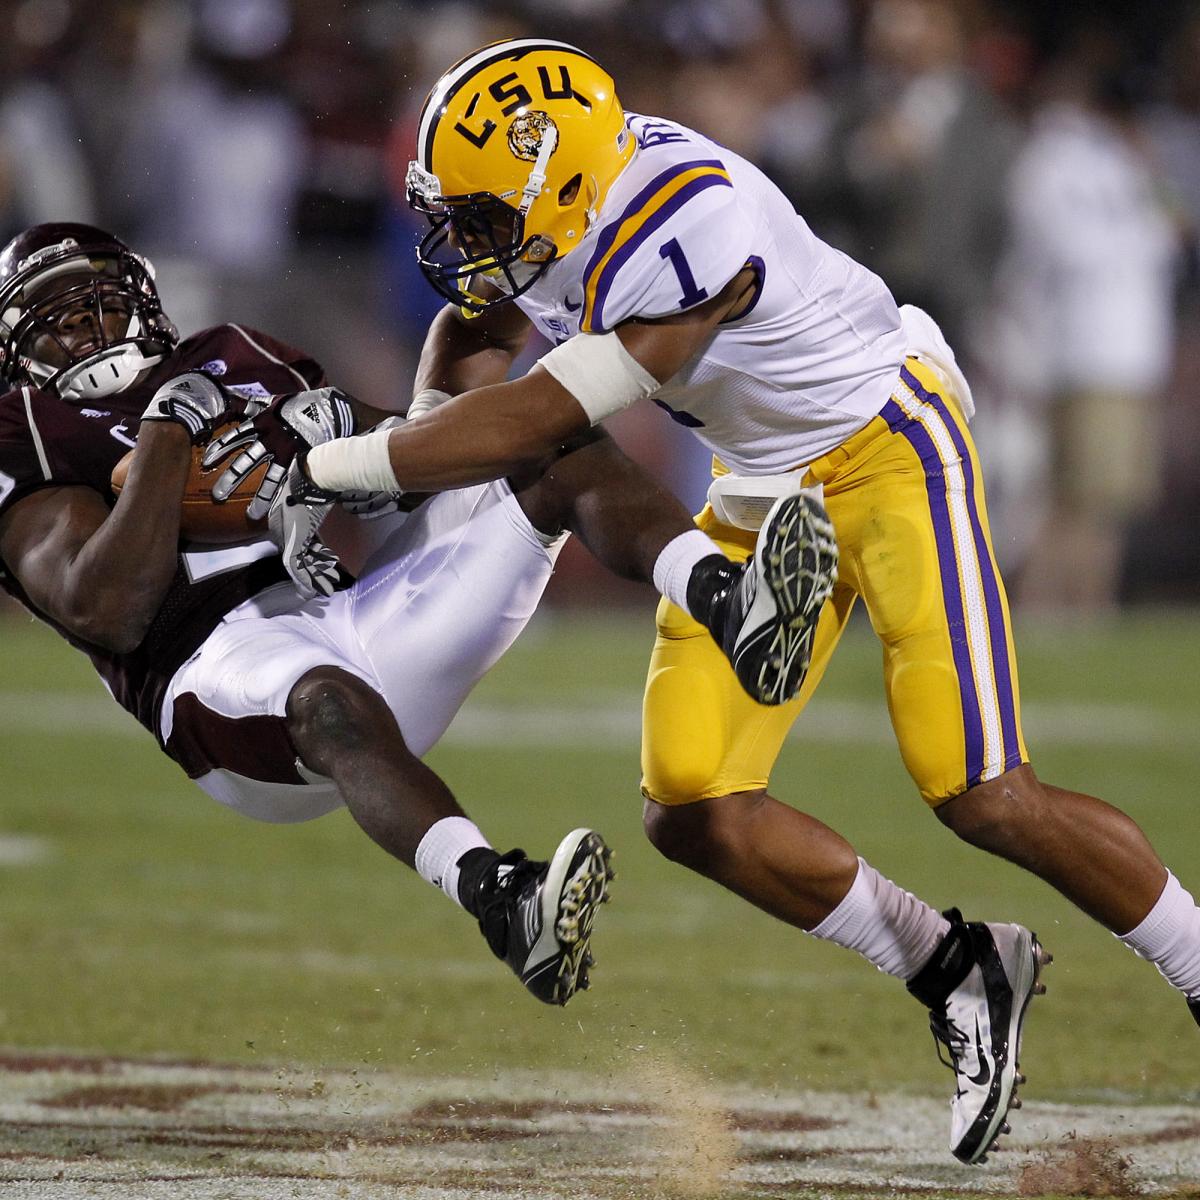 Lsu Football Power Ranking Each Offense The Stacked Tigers Defense Must Face News Scores 0485